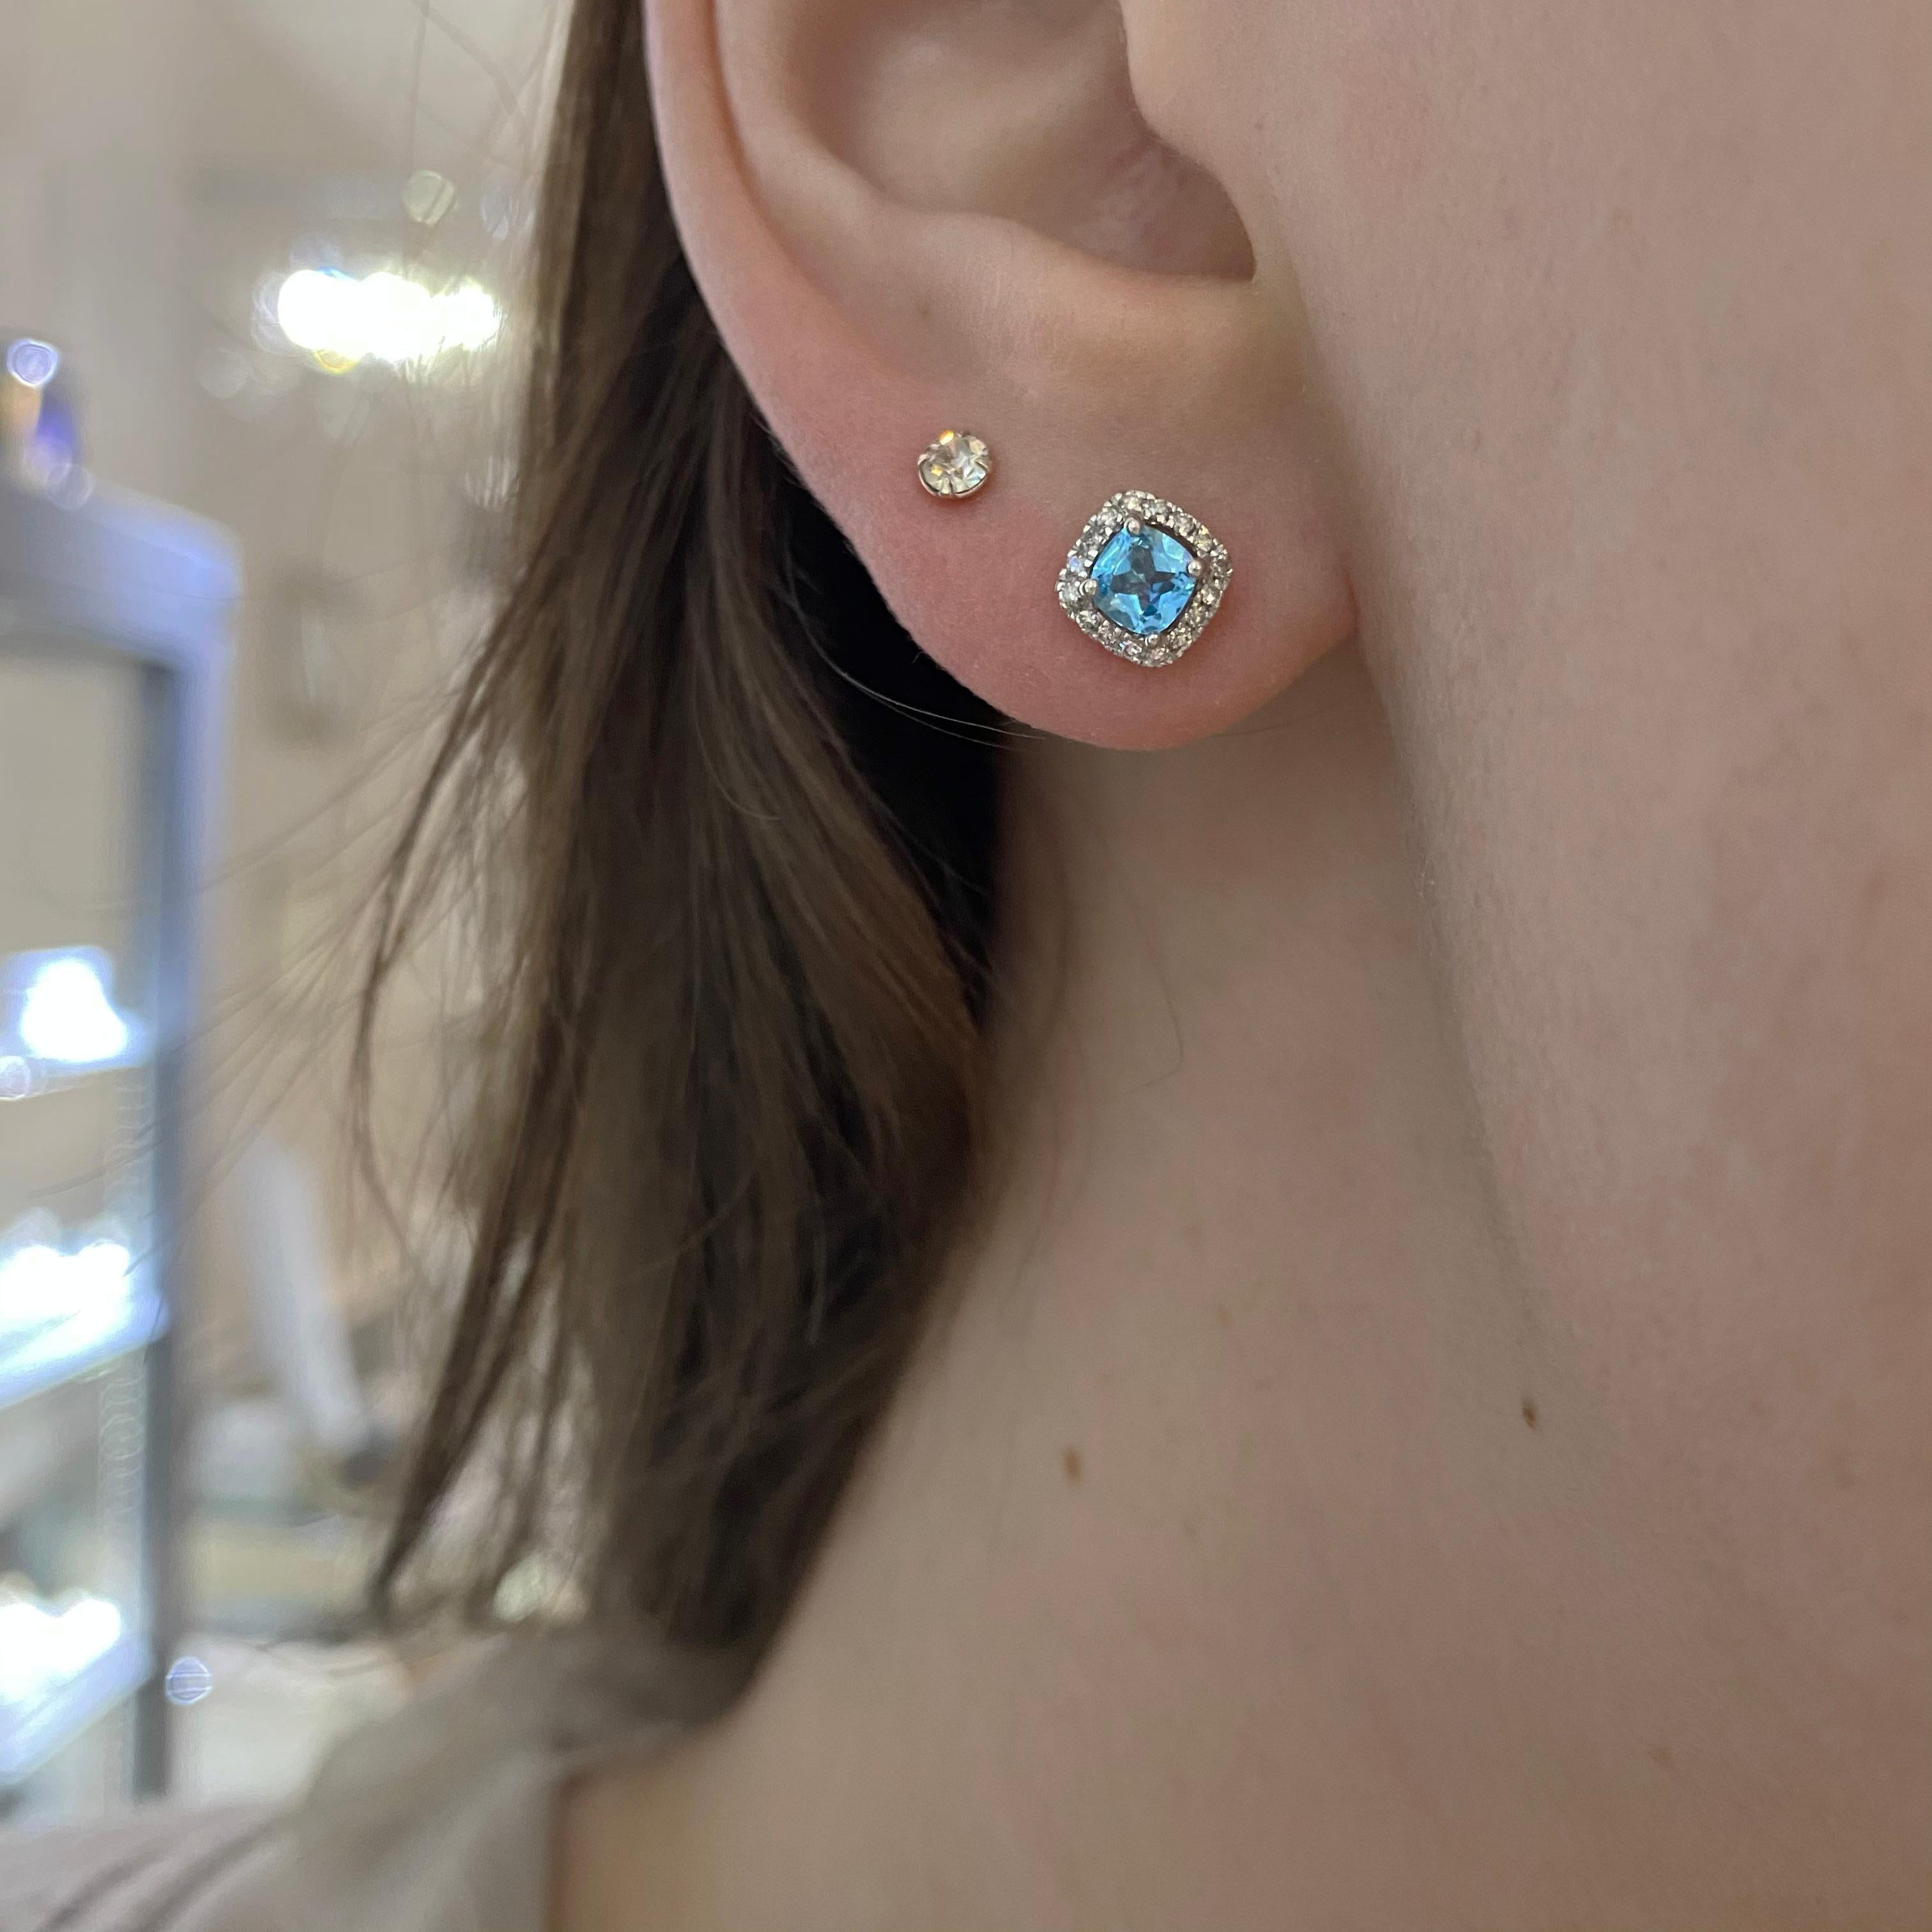 The details for these gorgeous earrings are listed below:
Metal Quality: Sterling Silver
Earring Type: Stud 
Diamond Number: 16
Diamond Total Weight:  .10 carat
Diamond Clarity: VS2 (excellent, eye clean)
Diamond Color: G (excellent, near